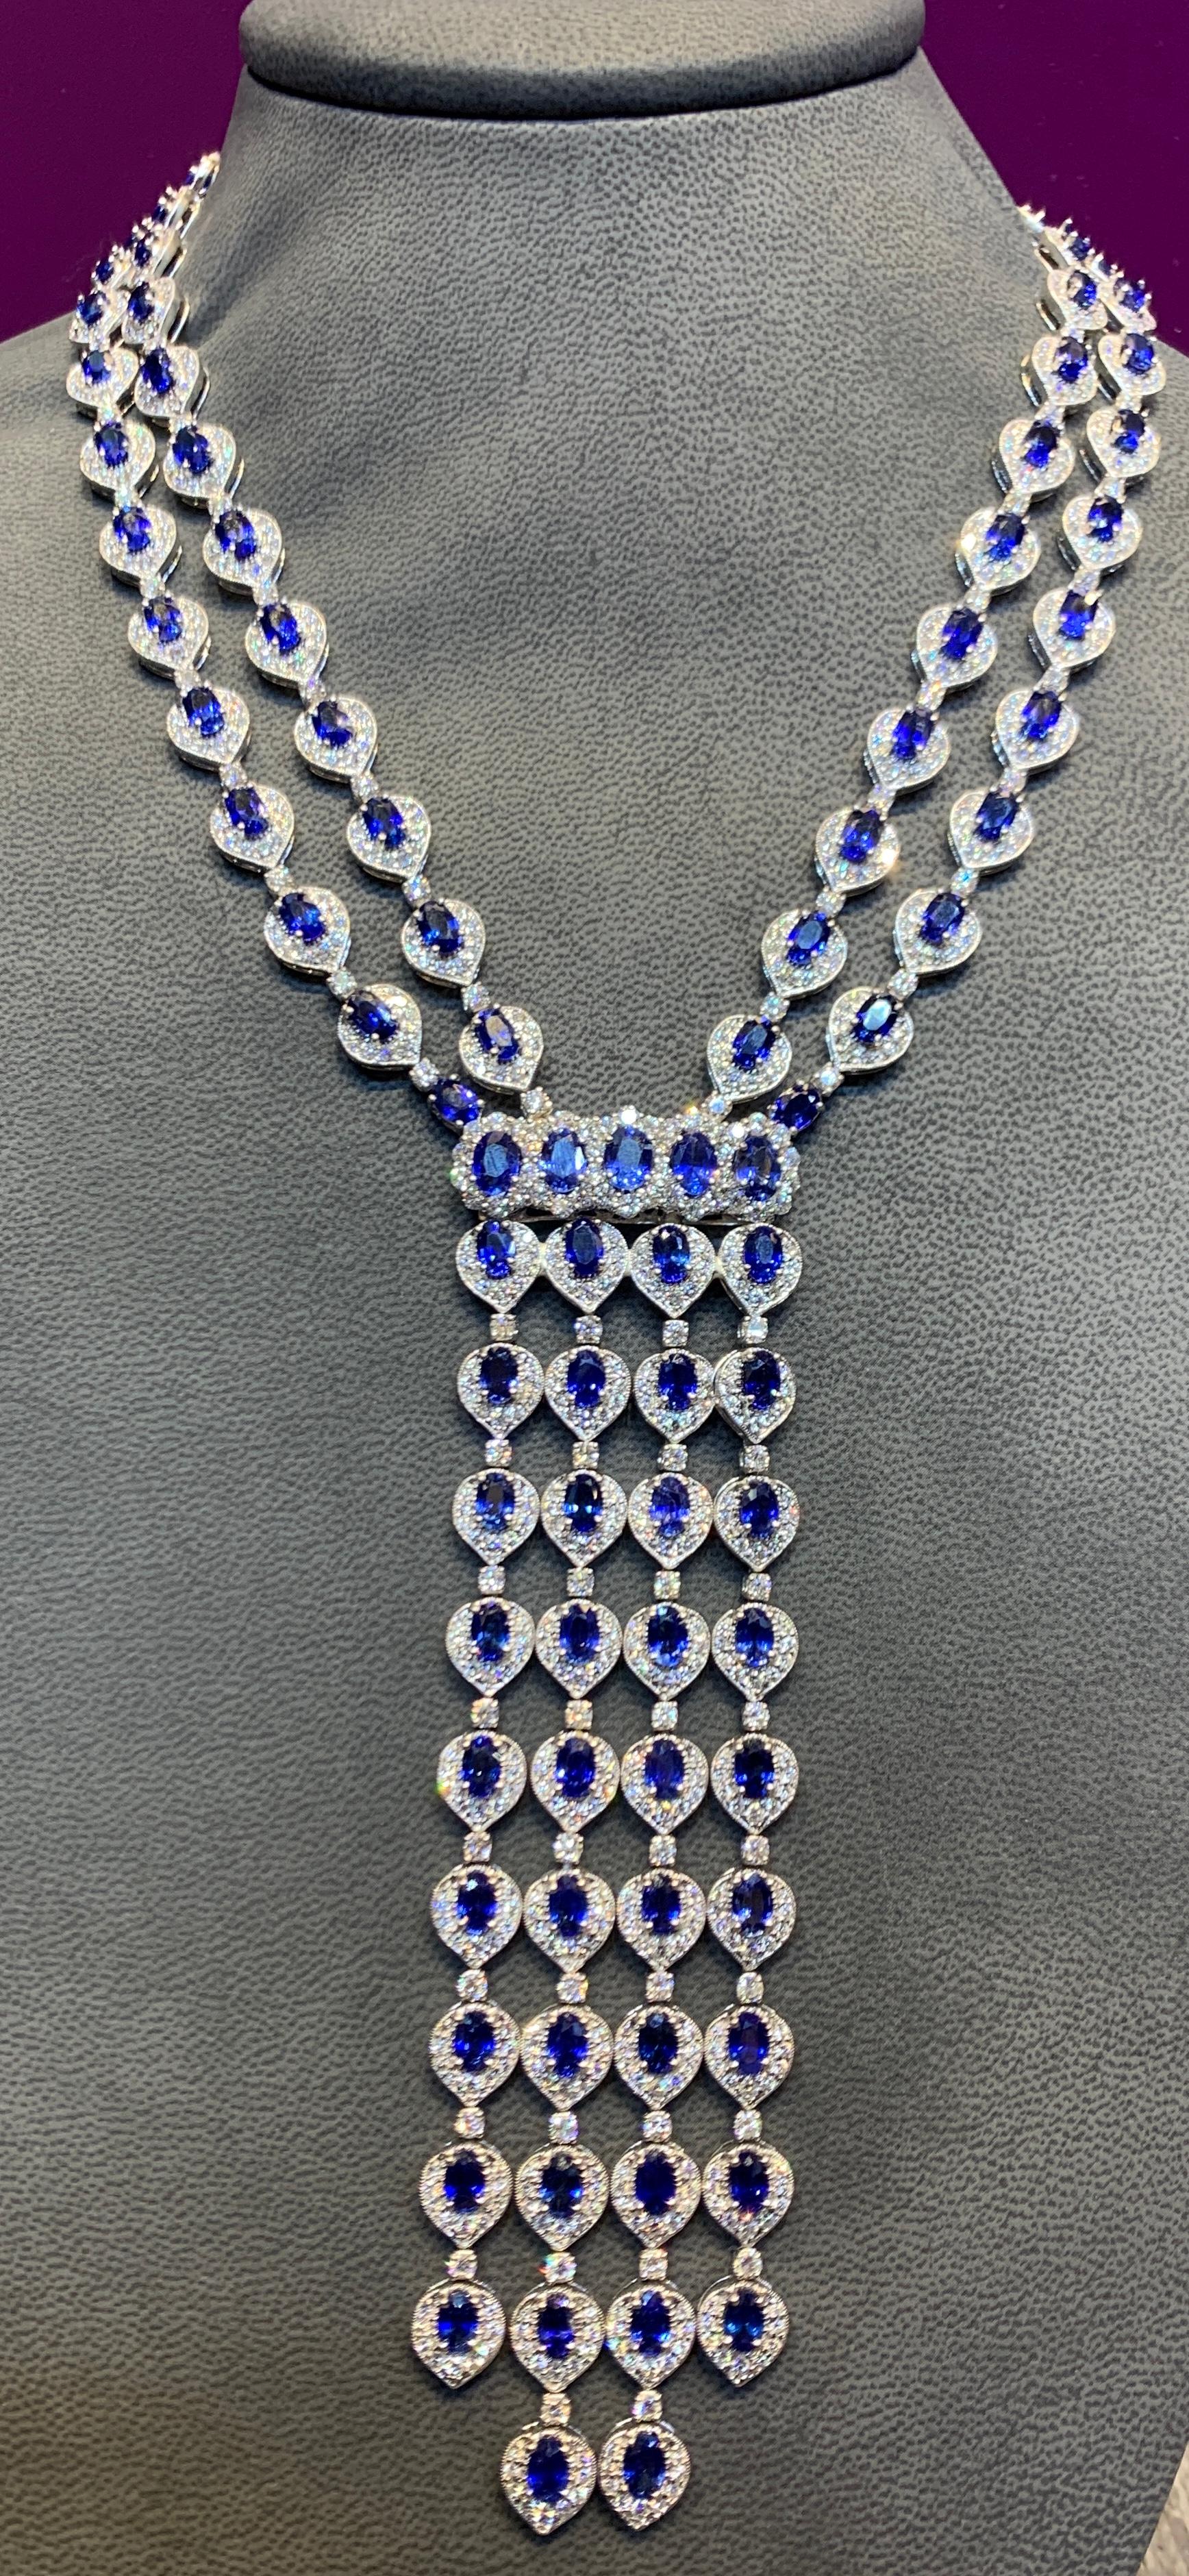 Magnificent Sapphire and Diamond Tassel Necklace

Approximately 77 carats of oval cut sapphires & 28 carats of round cut diamonds all set in platinum. 

Measurements: inner tassels: 5